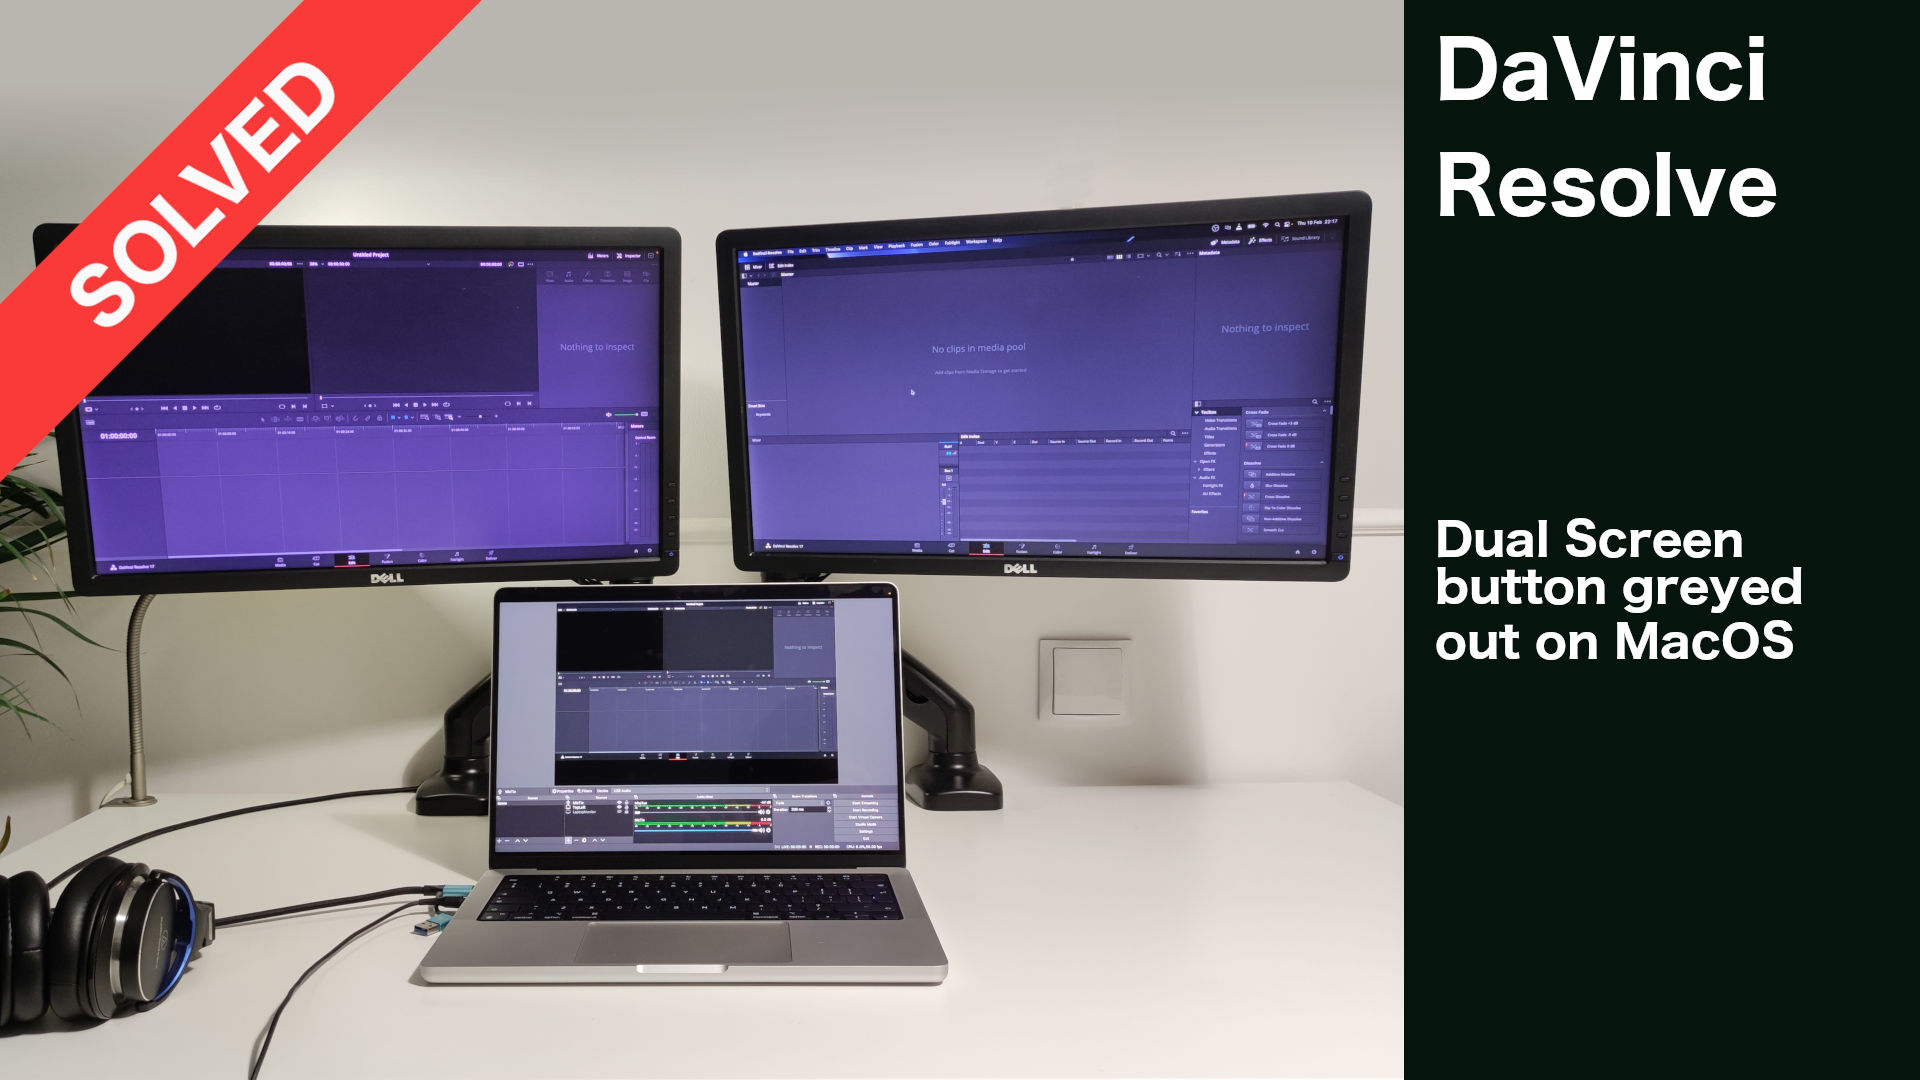 You are currently viewing DaVinci Resolve on Mac OS: Dual Screen button greyed out